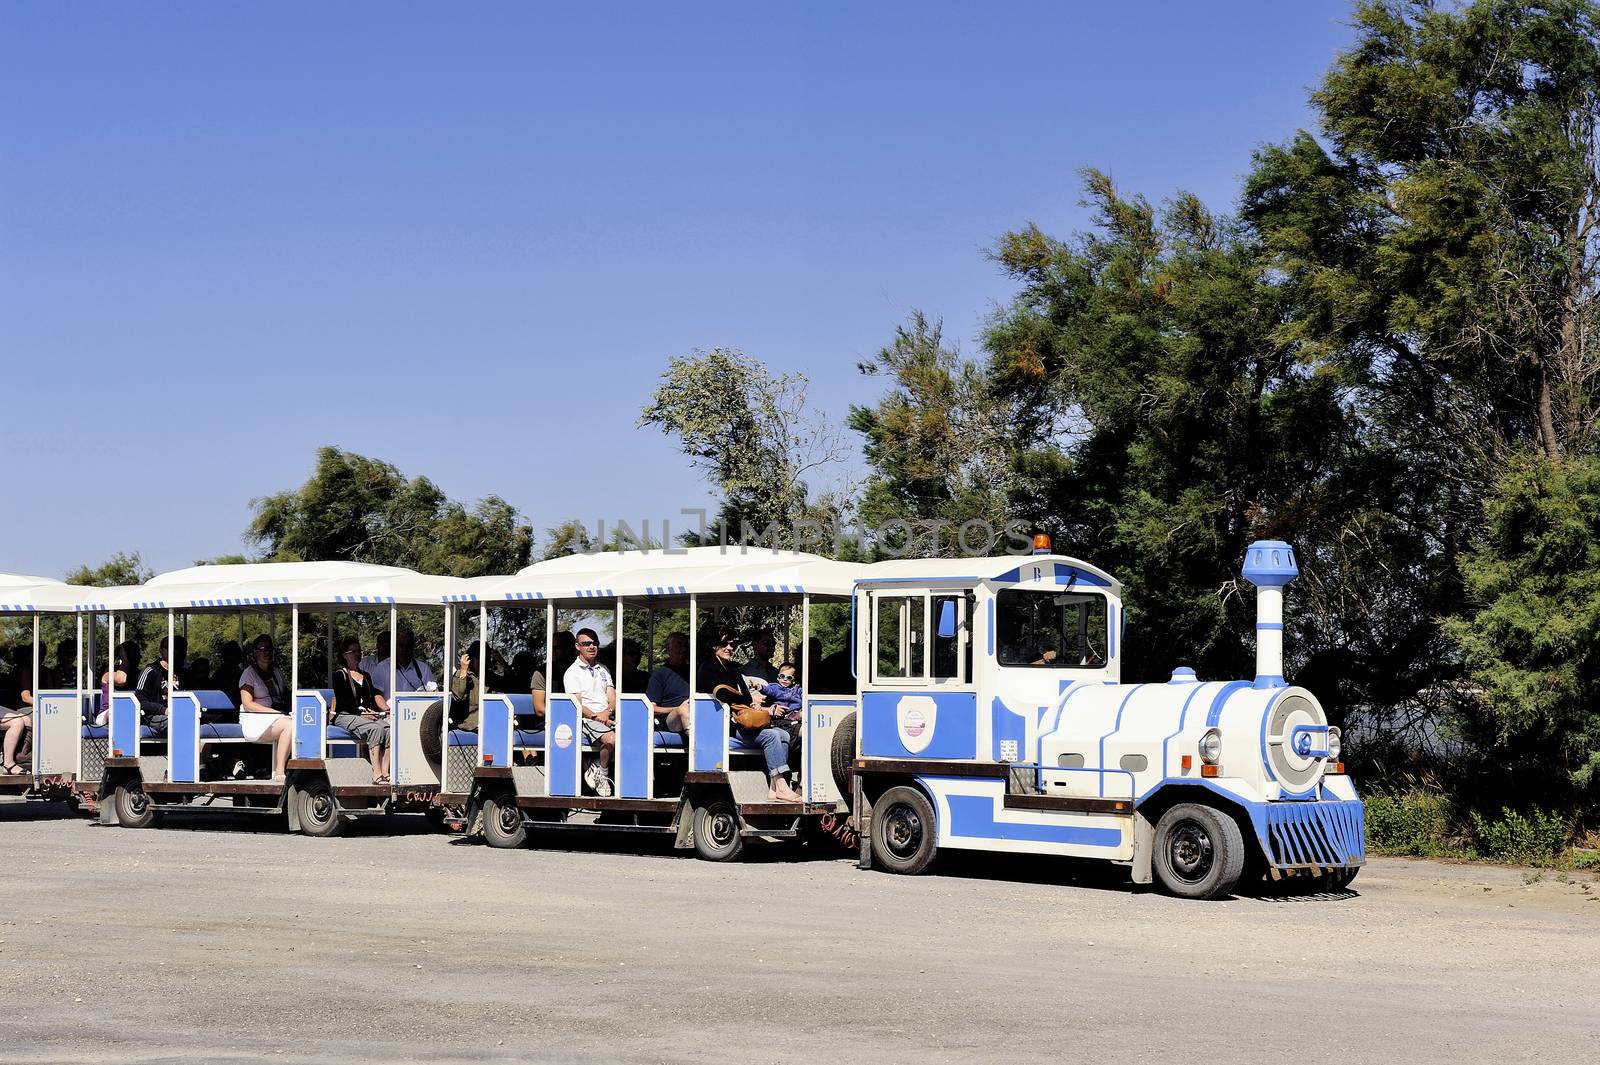 tourists in the tourist train to visit the salt business of Aigues-Mortes and to tour the mine salt site.